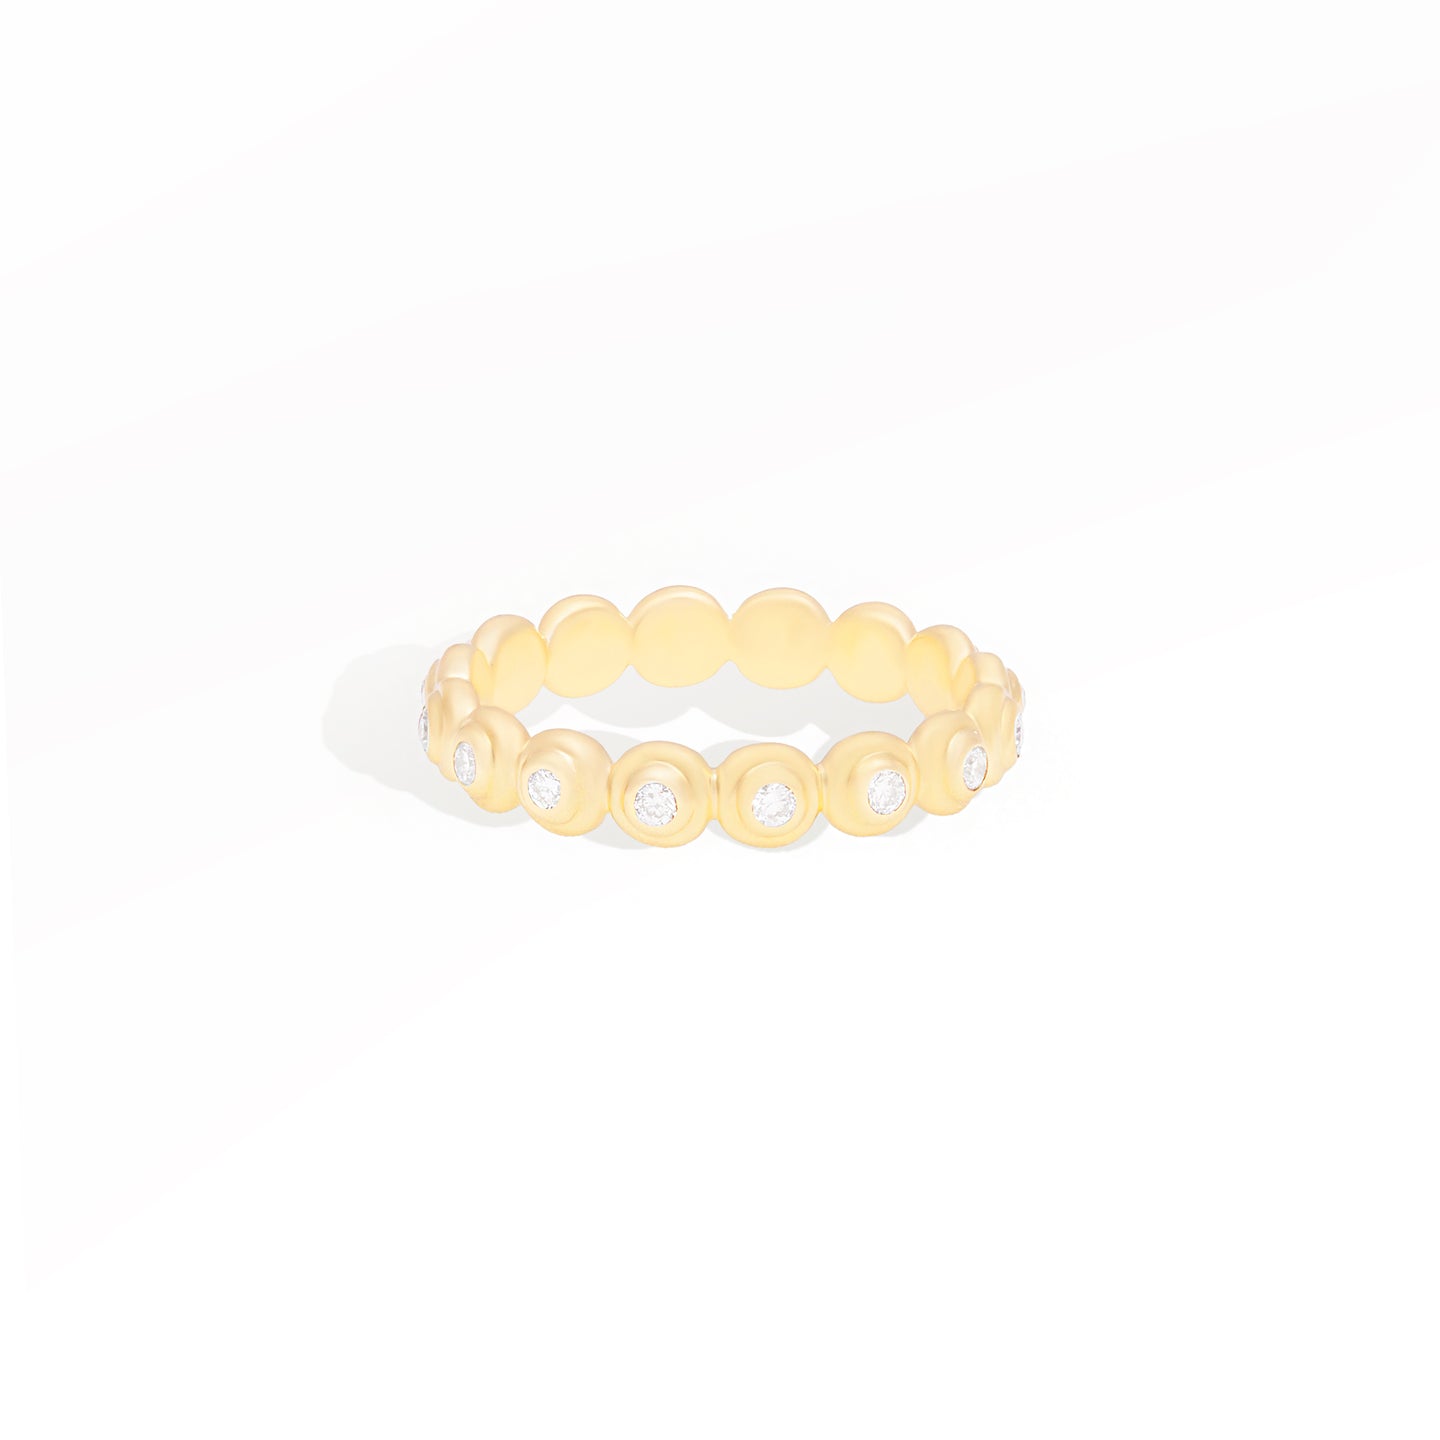 Evolve Stacking Ring - Small (Diamond)